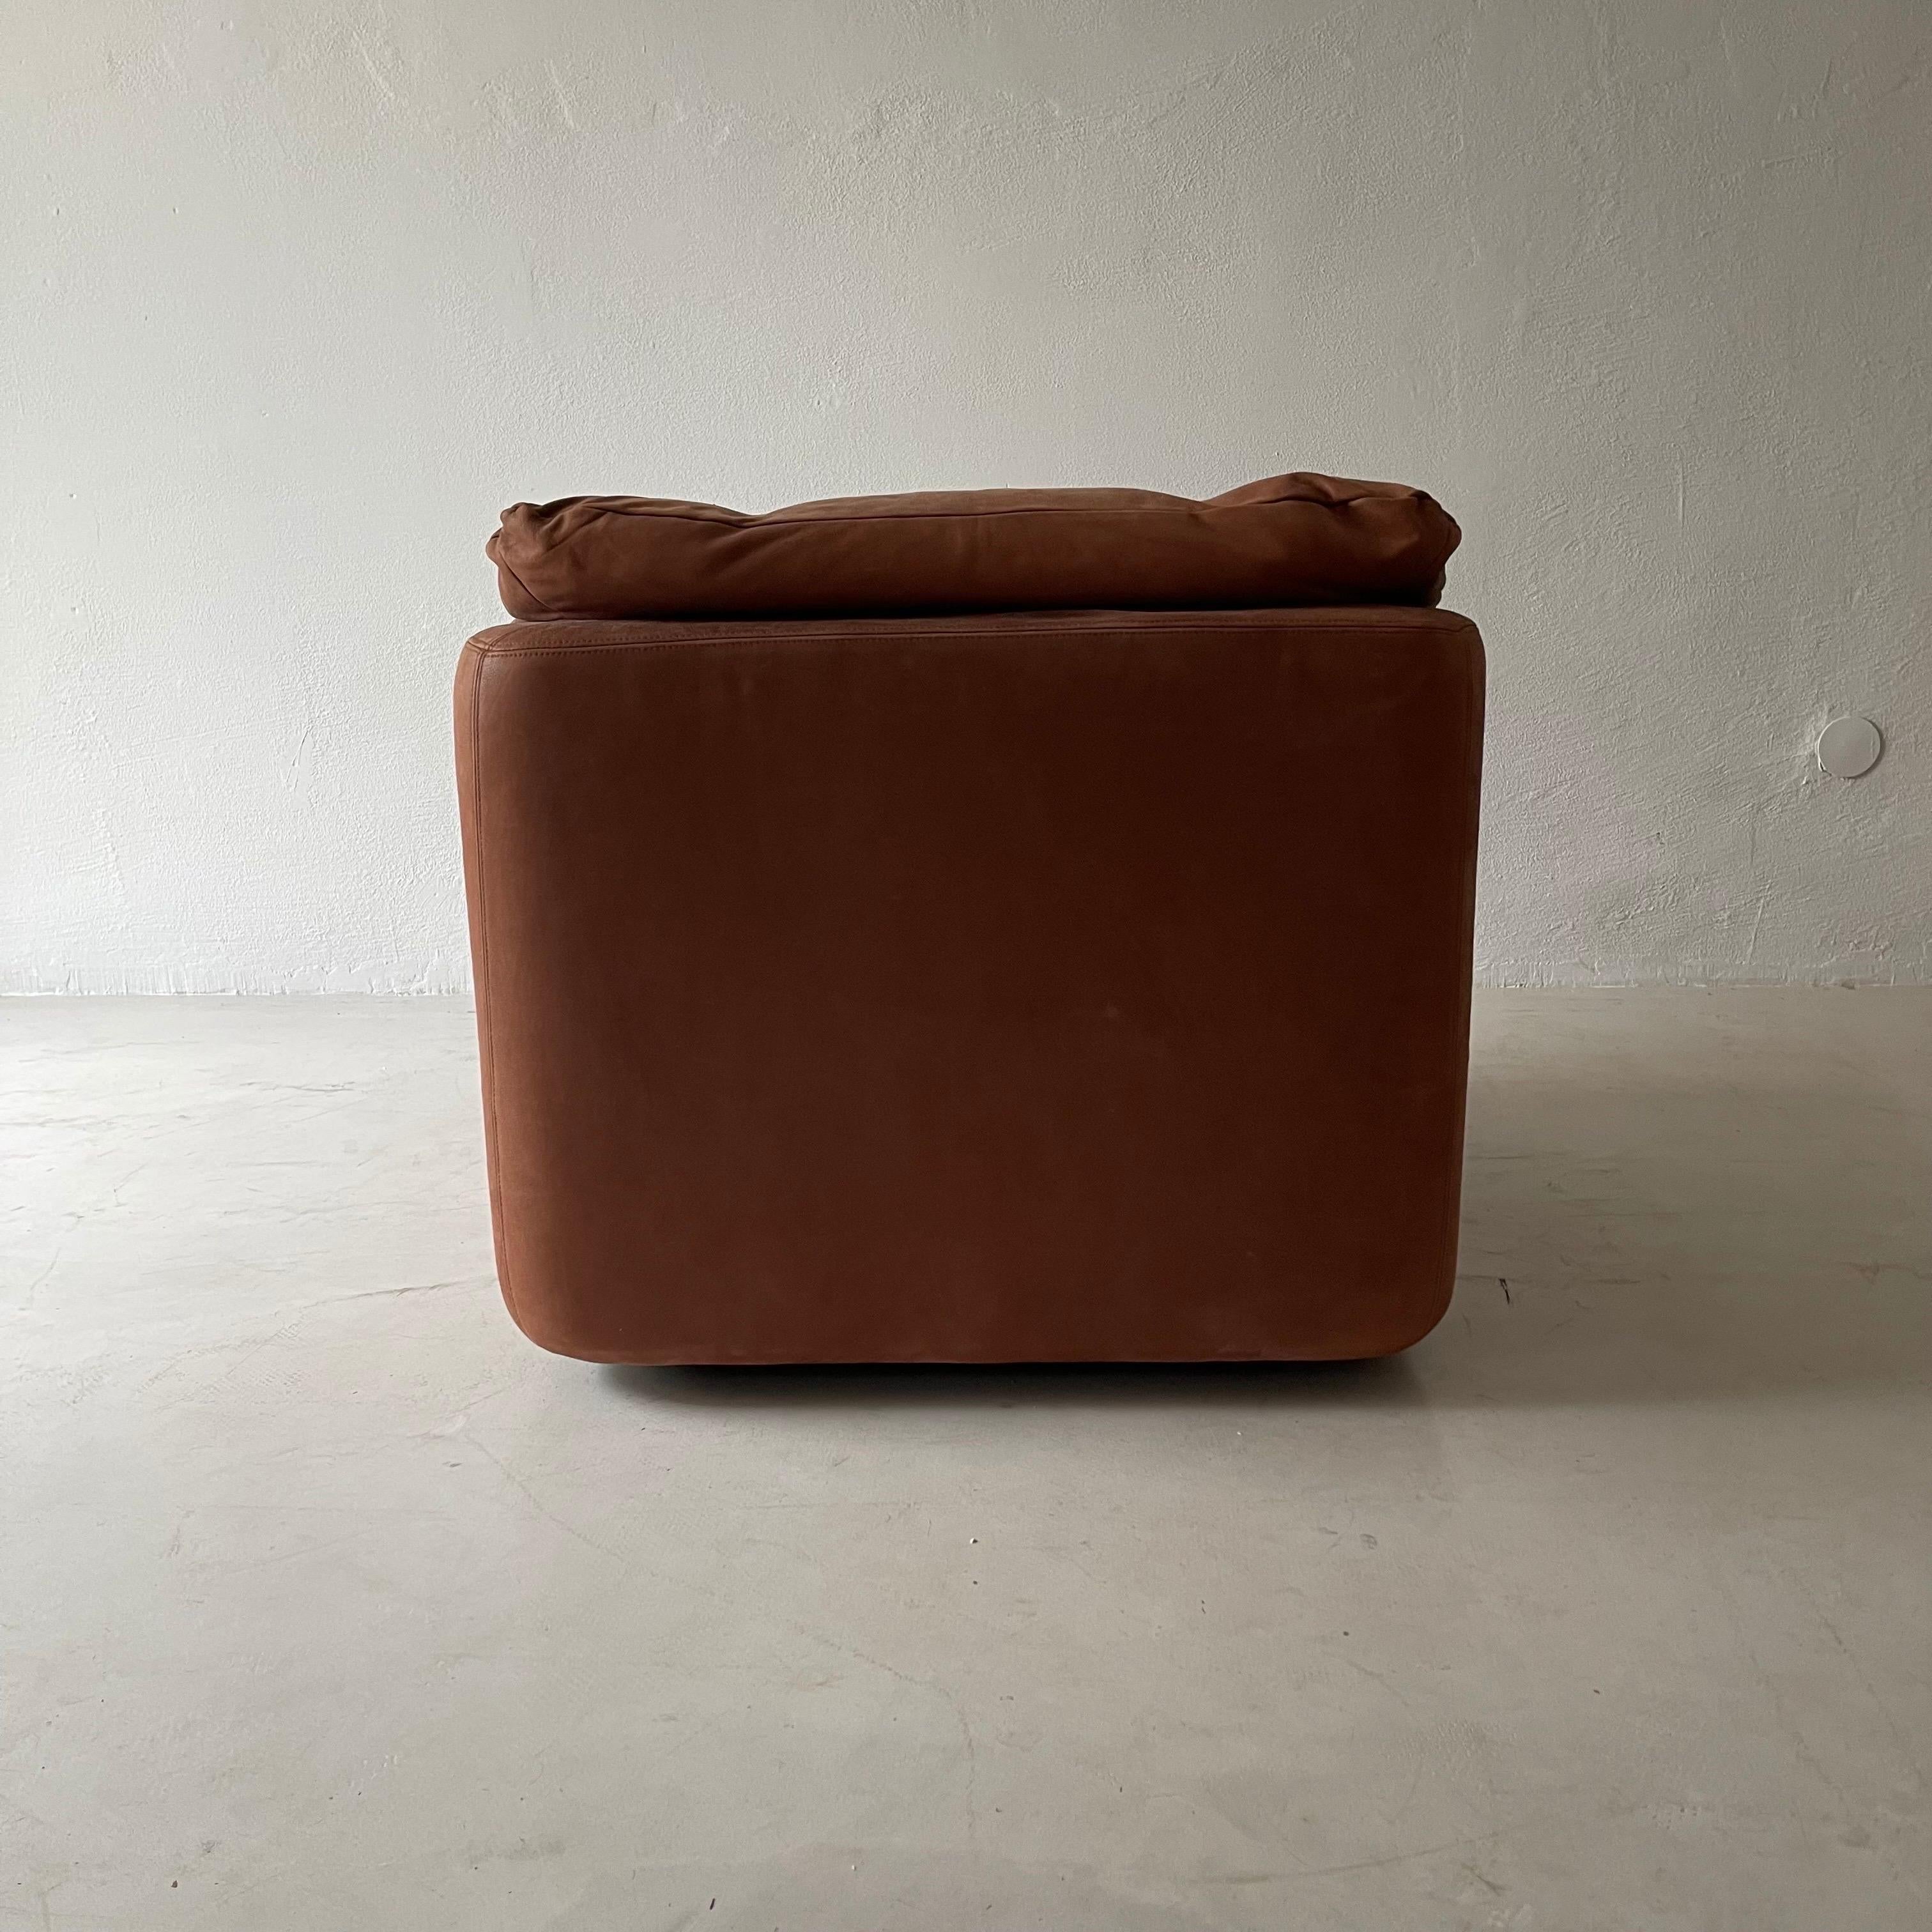 Vintage Modular Sofa by Friedrich Hill for Walter Knoll 1970s For Sale 8